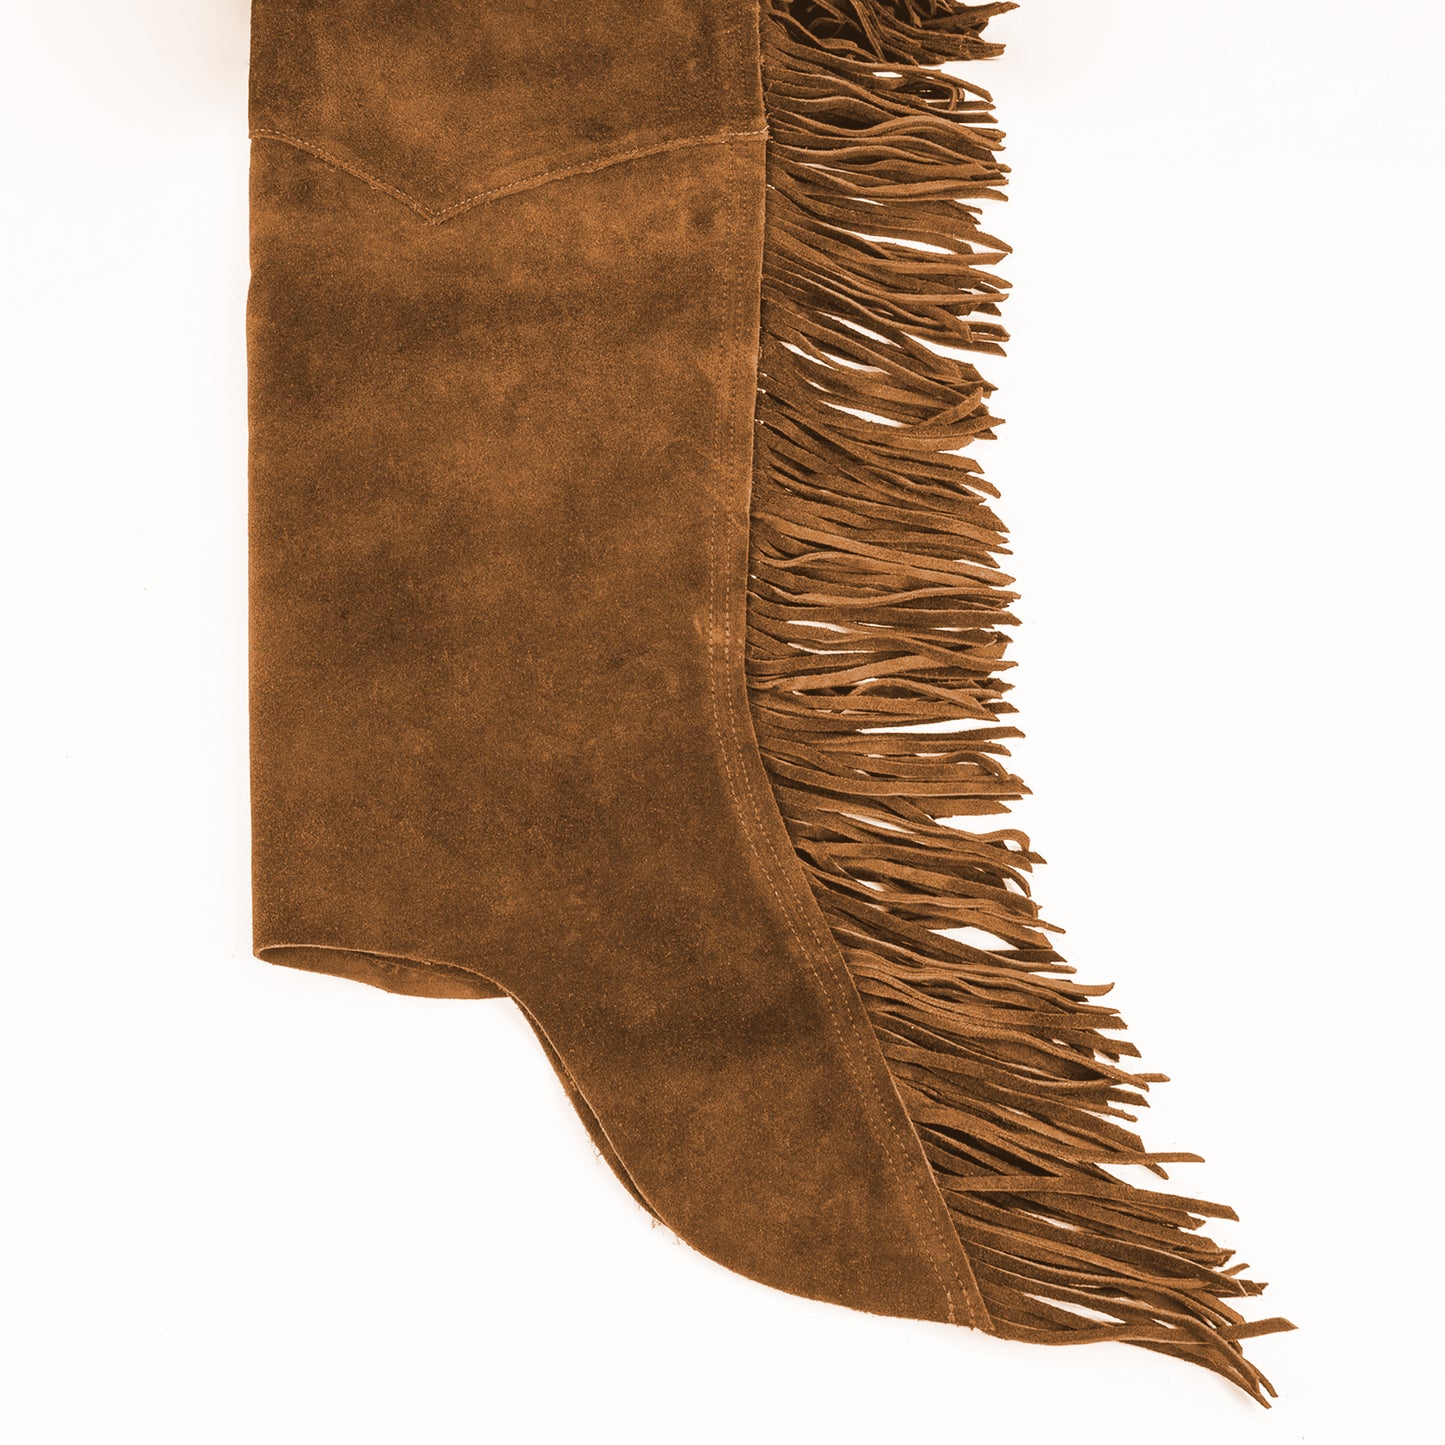 Western Equitation Chaps - Toast Suede - Fringe - Double Concho